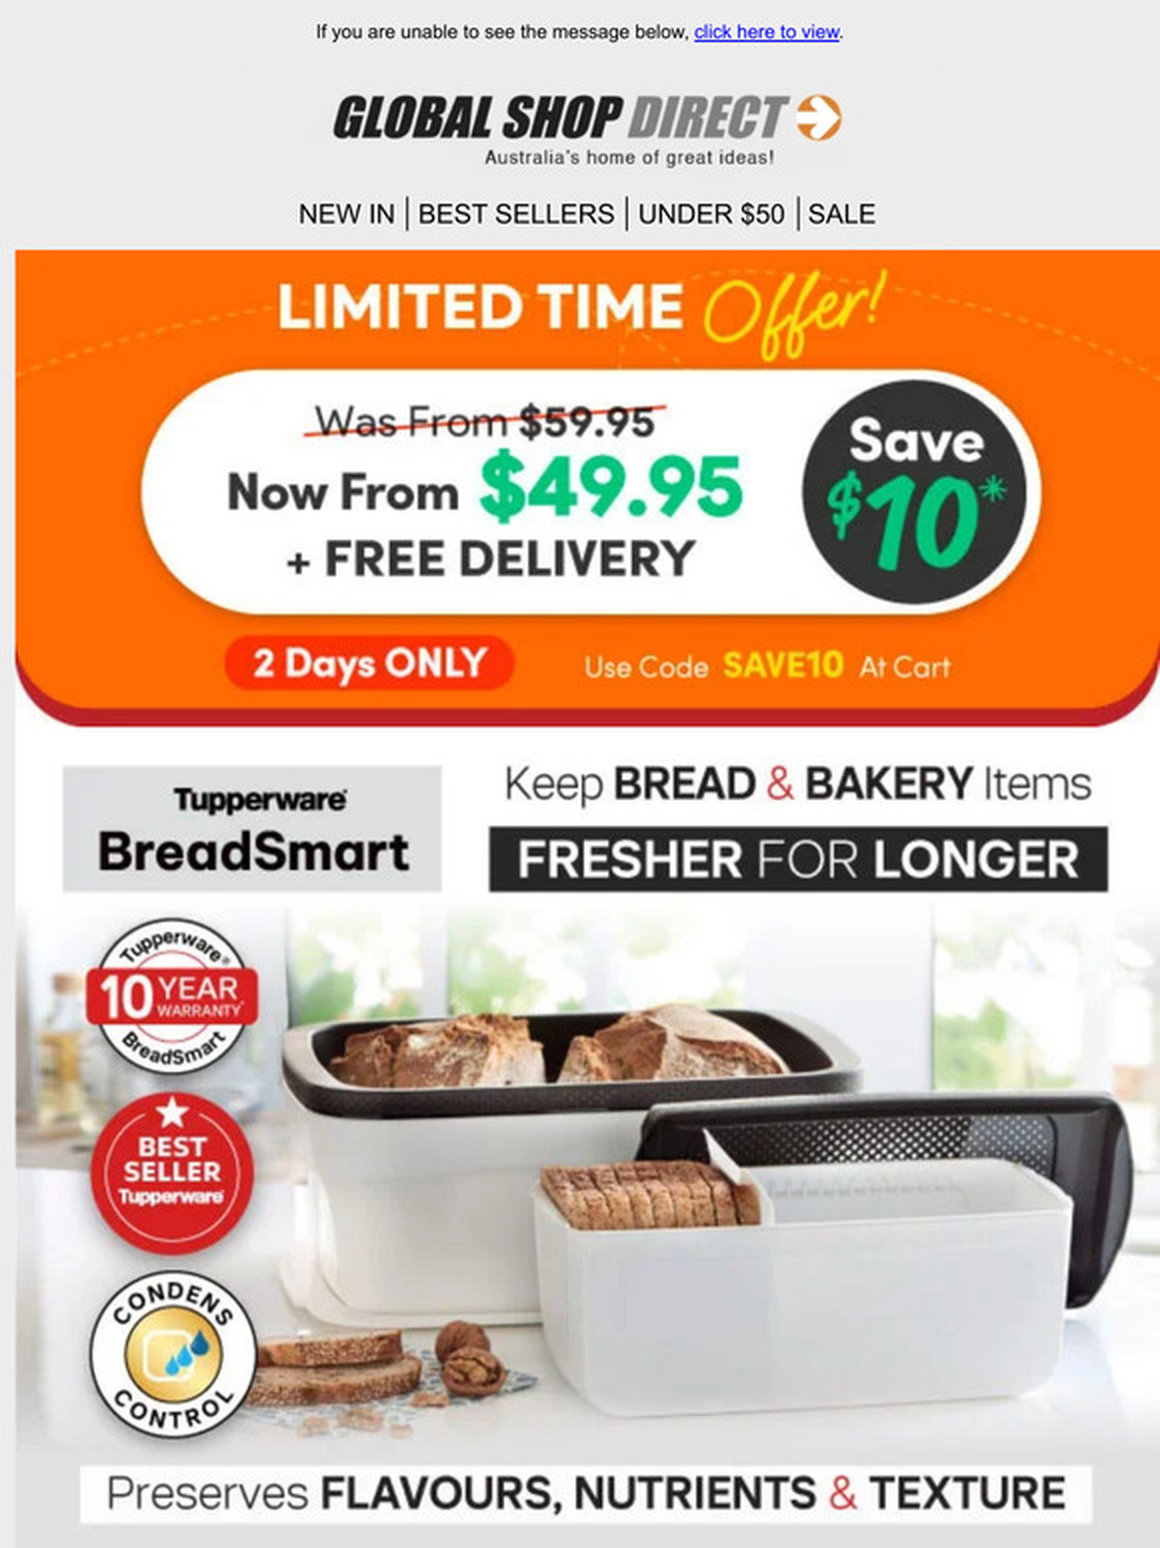 Save $10 on BreadSmart by Tupperware!